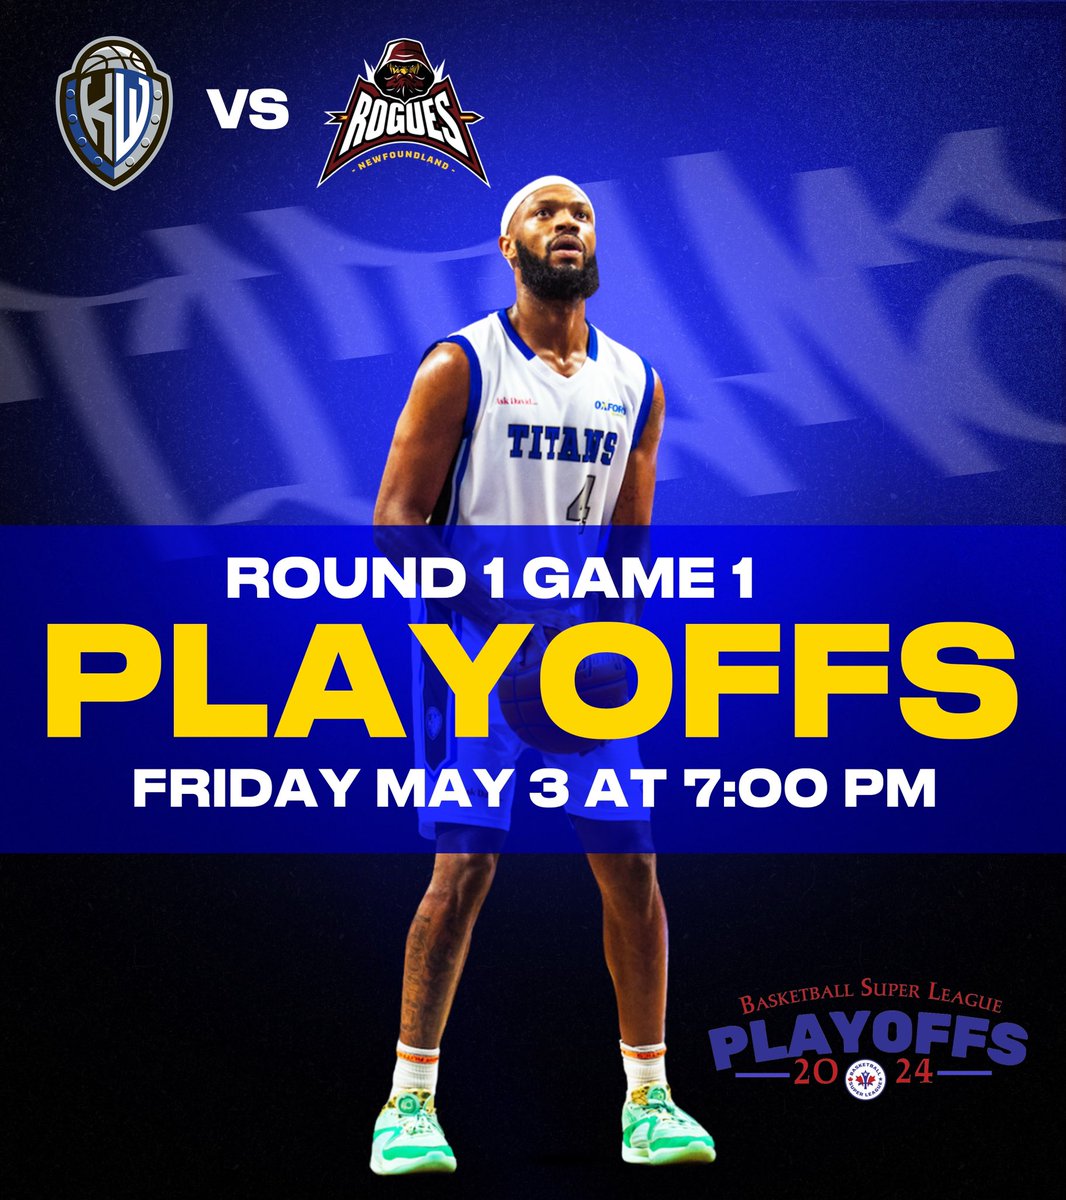 TOMORROW - FRIDAY MAY 3 AT 7:00PM Join us at the Kitchener Auditorium as we kick off our playoff series against the Newfoundland Rogues and take on Game 1. This 5 game series will determine who will make it to the finals and go for the championship! Buy your tickets NOW at…